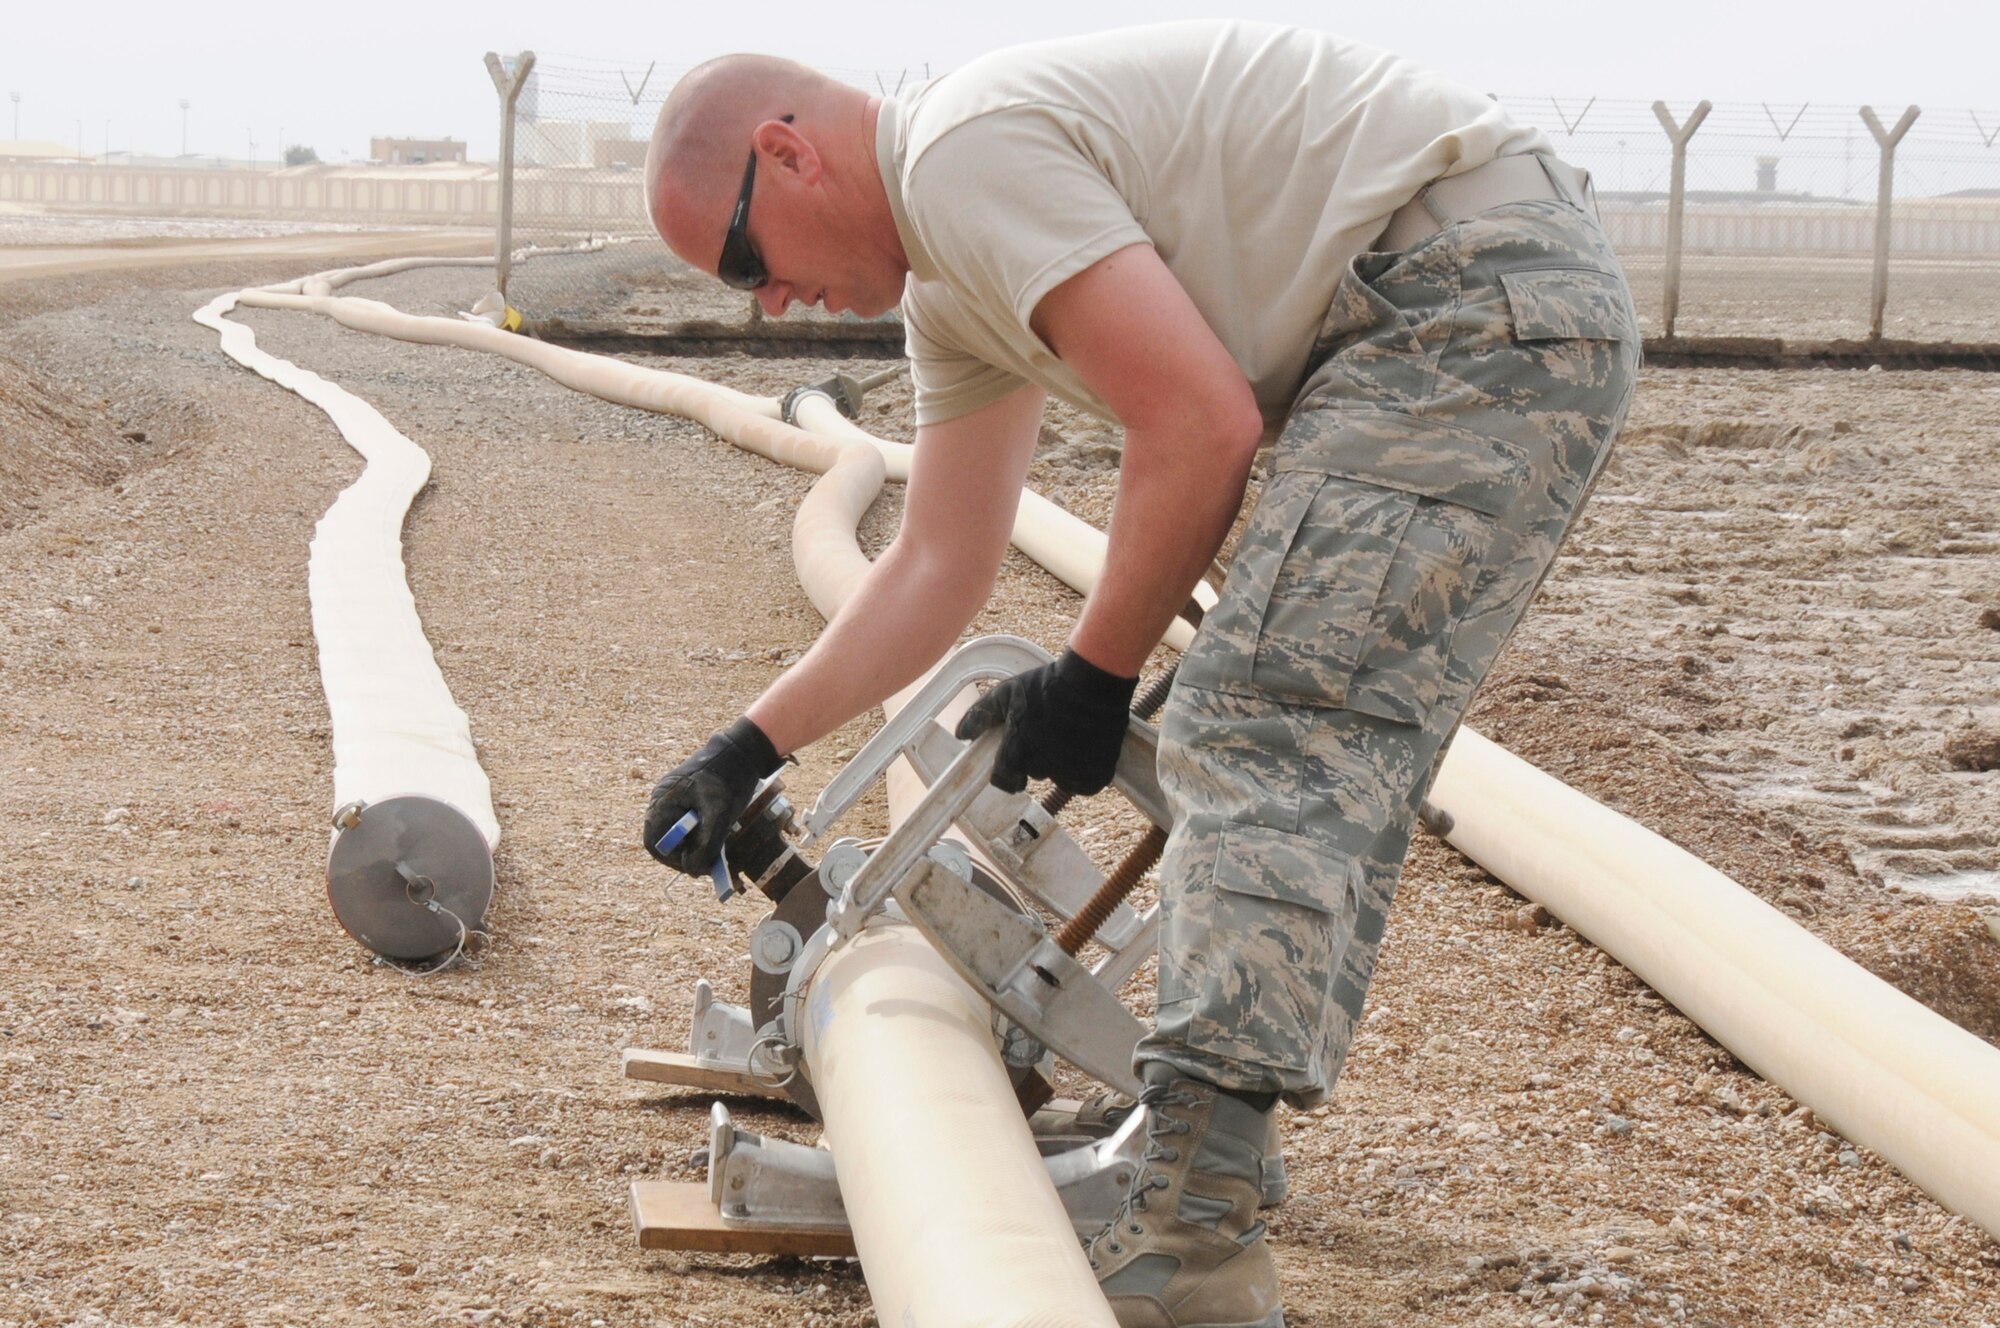 SOUTHWEST ASIA - Tech Sgt. David Butts, 380th Expeditionary Logistics Readiness Squadron, fuels flight, puts a hose clamp on a fuel line, Feb 7. The clamp allows the lines to be disconnected without completely draining the fuel to allow a faster transition to the new fuel lines. The fuels flight upgraded the fuel line named "python", changing out 5000ft, upgrading the old worn line ensuring a steady flow of fuel to the base. The fuels flight will replace an additional 3000ft within the next few weeks. Sergeant Butts is deployed from Nellis AFB and hails from Las Vegas, Nev. (U.S. Air Force photo by Senior Airman Brian J. Ellis) (Released)